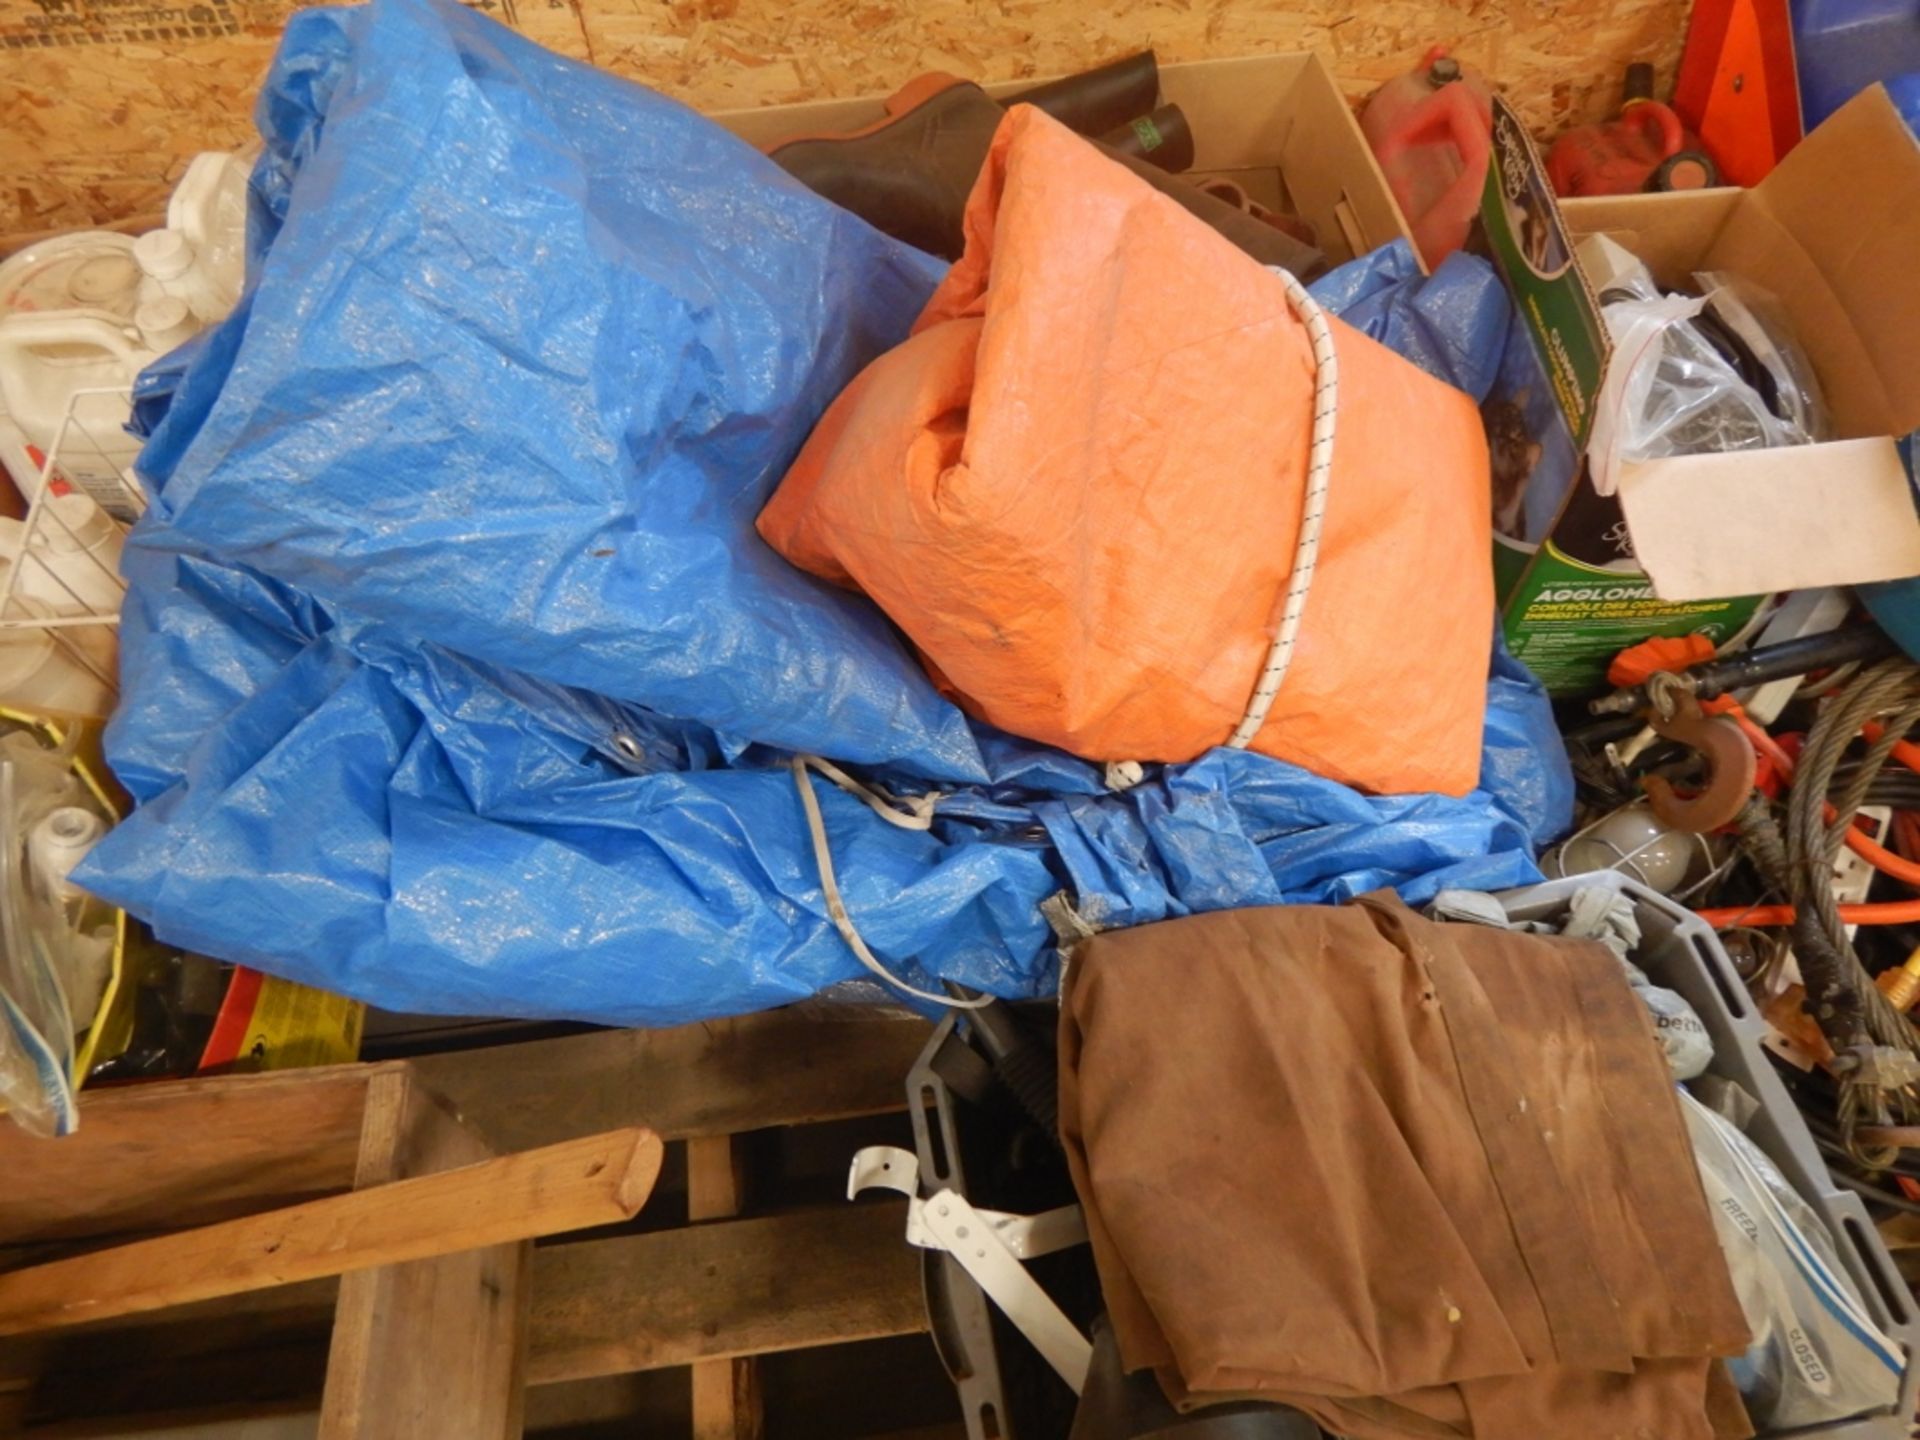 L/O TARPS, PAINT CANS, WEED SPRAY, EGG CRATE, RAIN GEAR, POLY FUNNEL, ETC. - Image 5 of 6